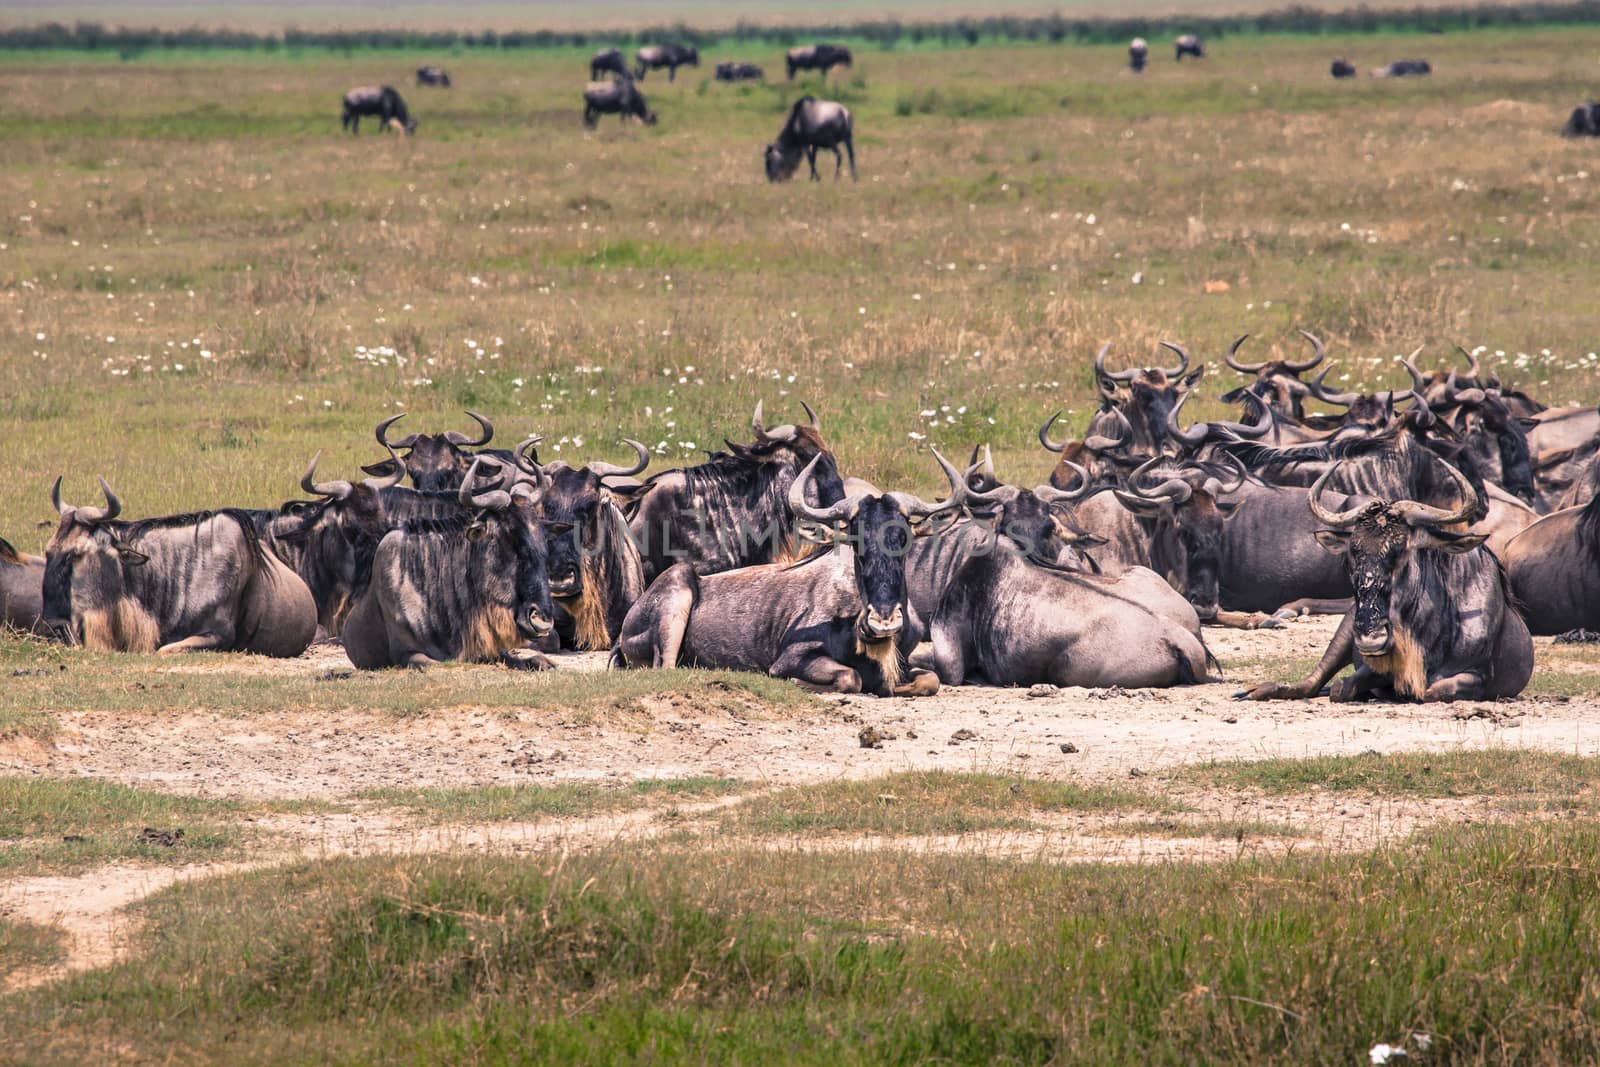 A Wildebeest mother and newly born calf, Ngorongoro Crater, Tanz by mariusz_prusaczyk